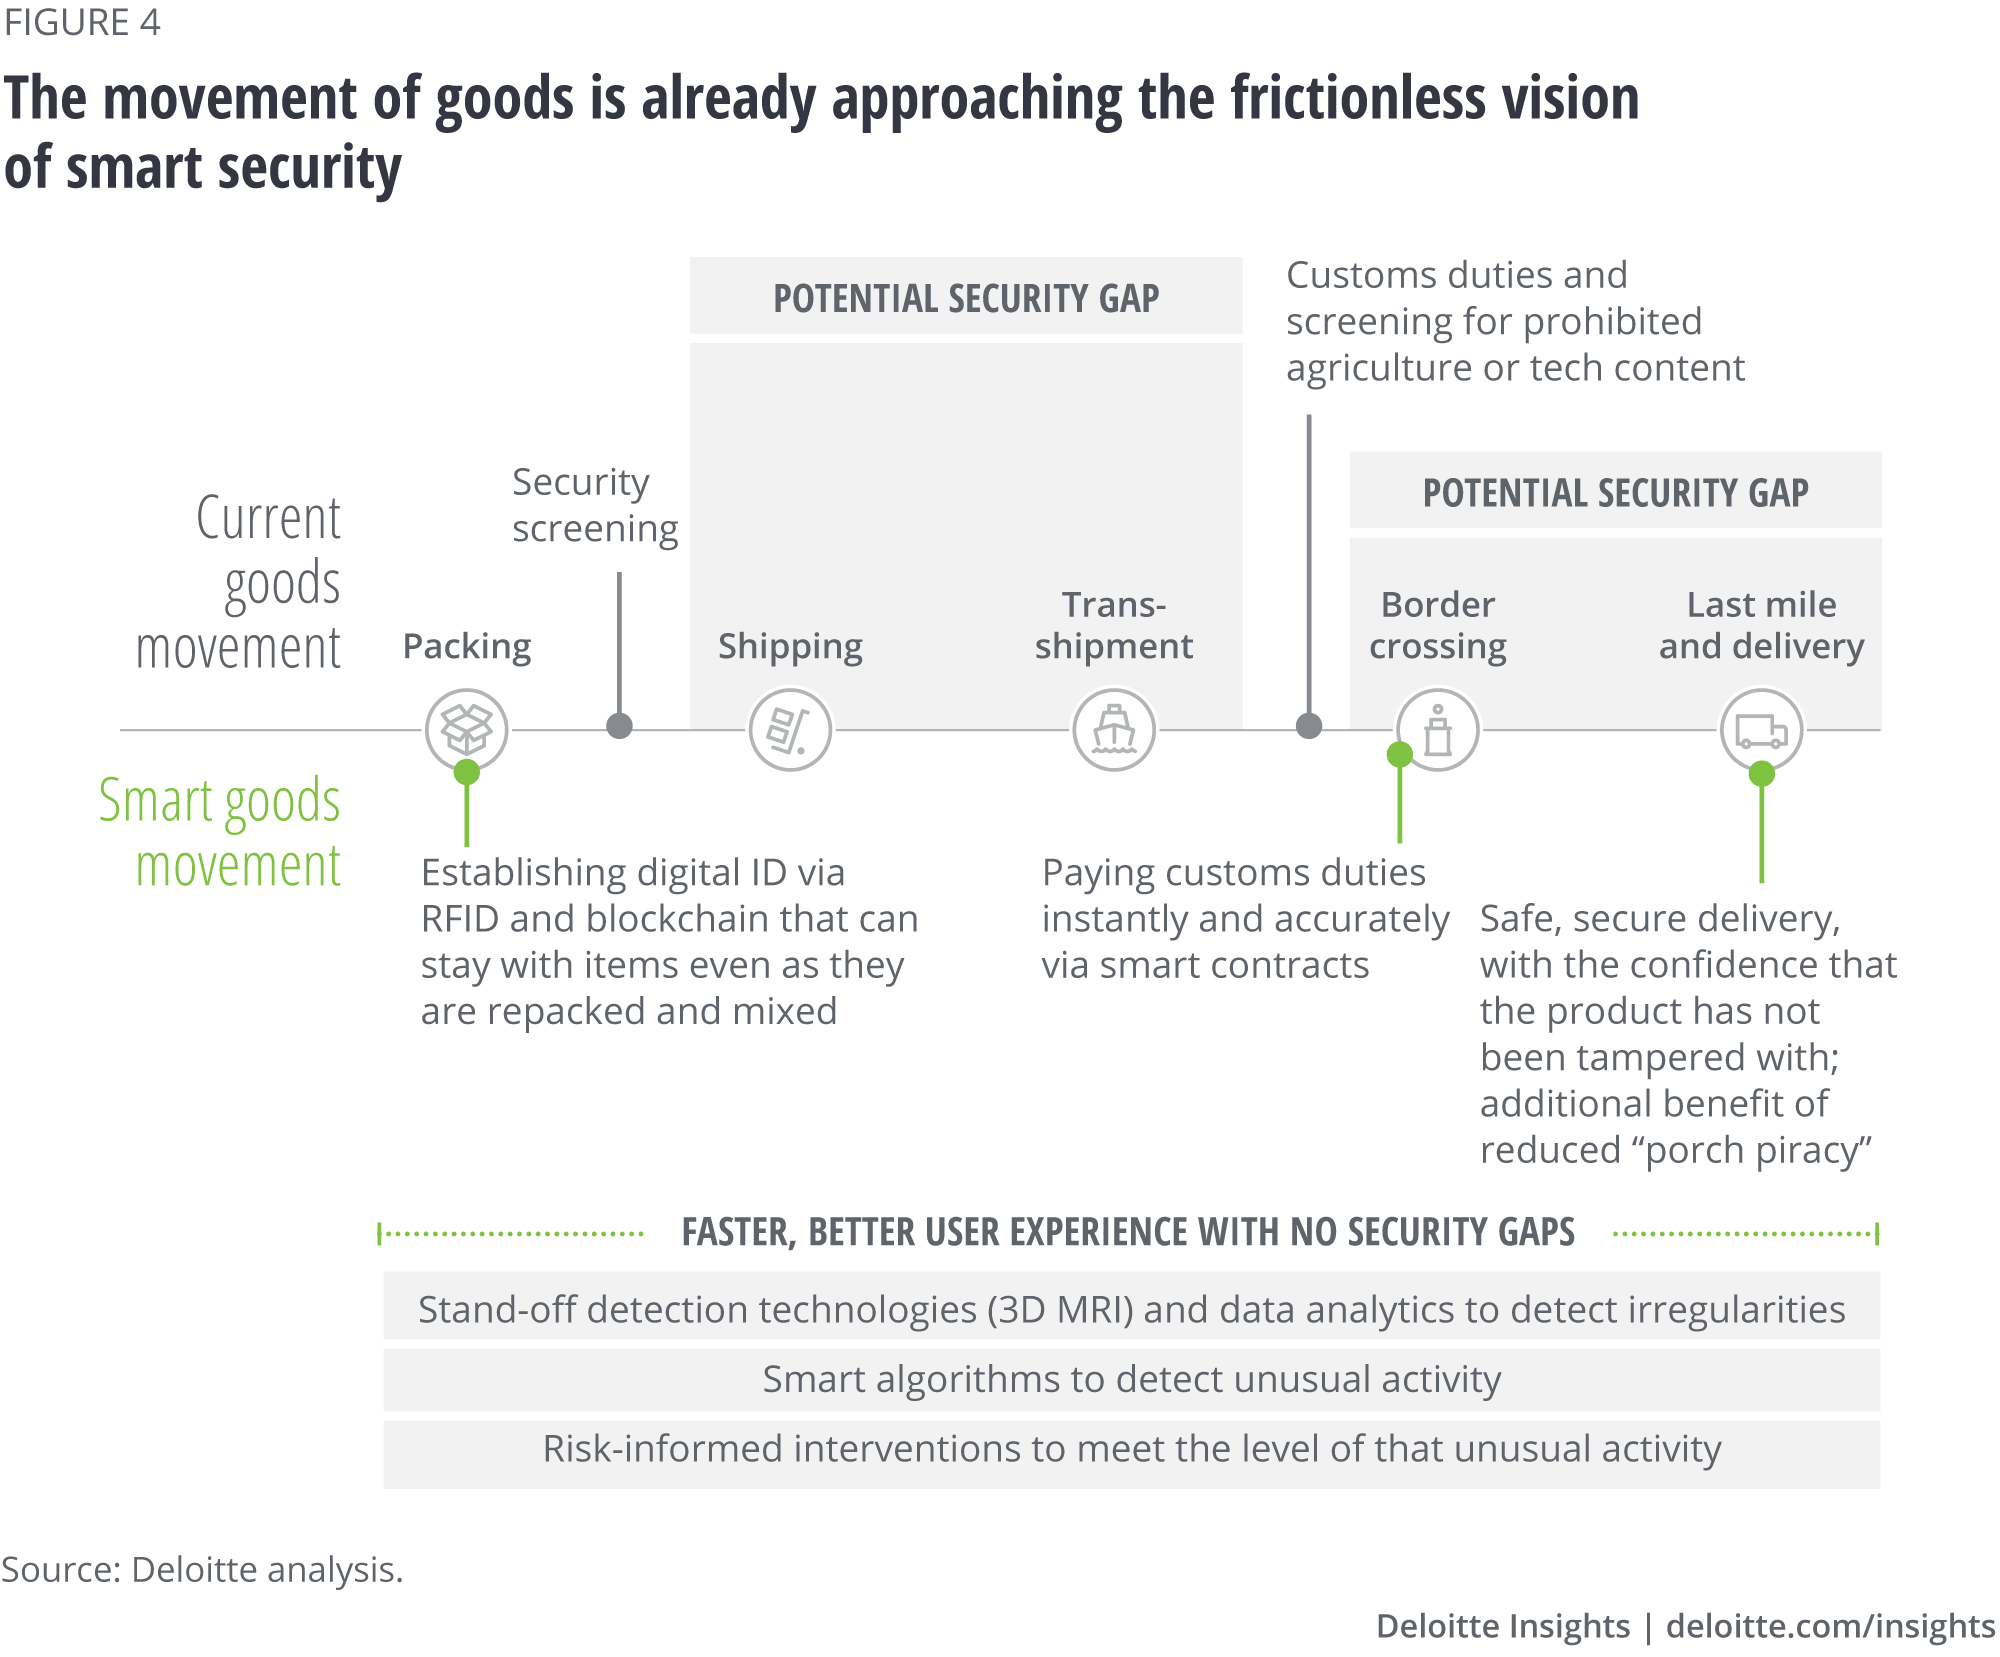 The movement of goods is already approaching the frictionless vision of smart security